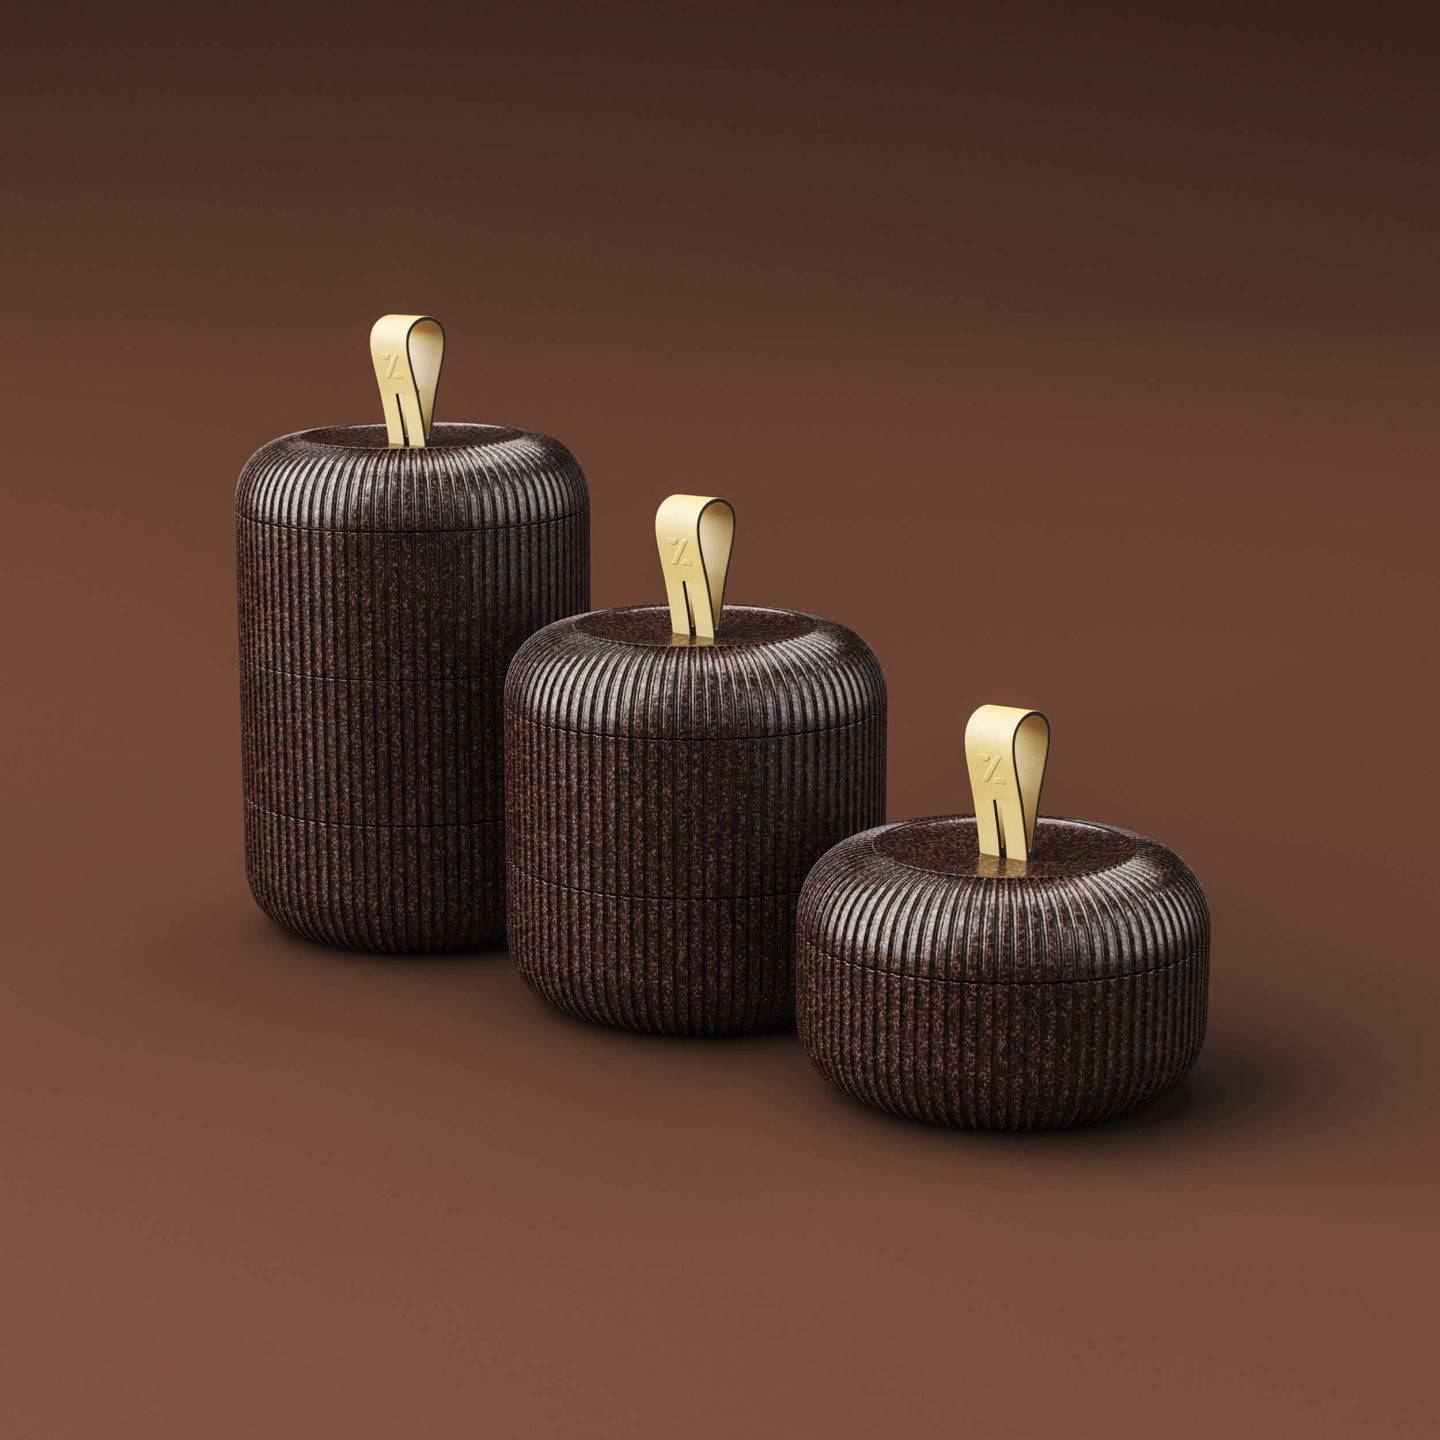 Three stacked brown bento box style containers in different sizes on a light brown background